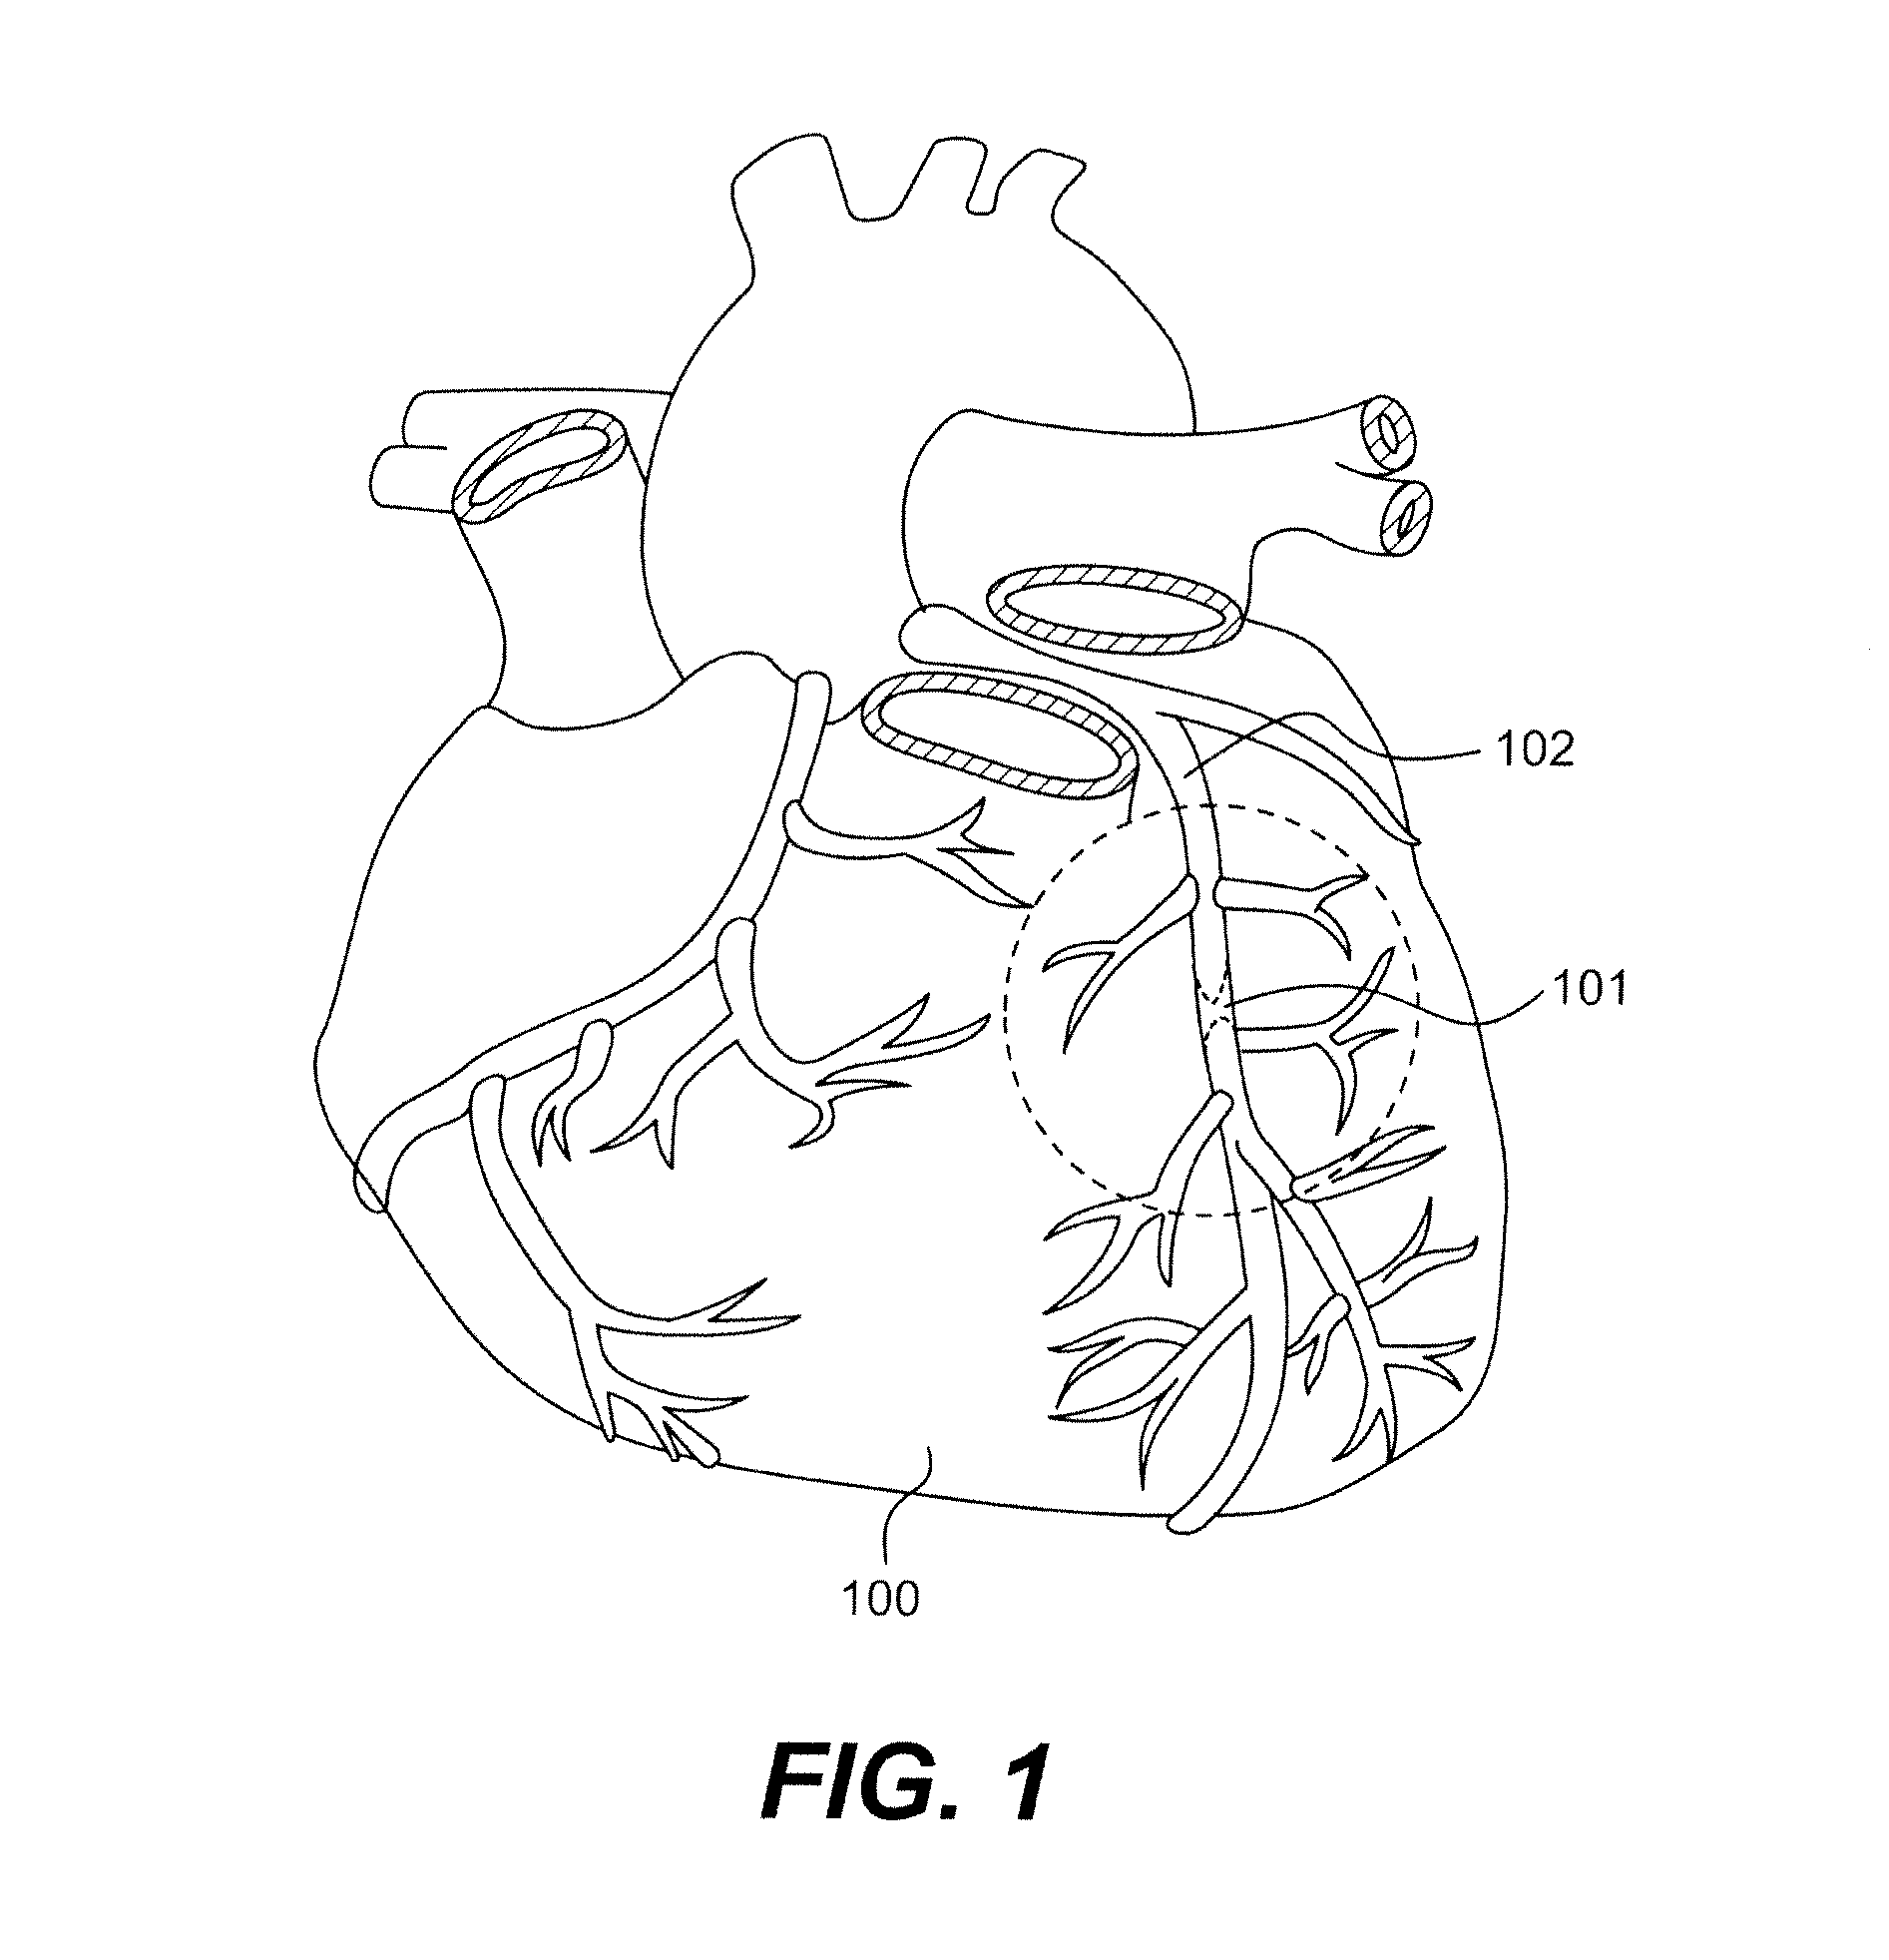 Endovascular devices and methods